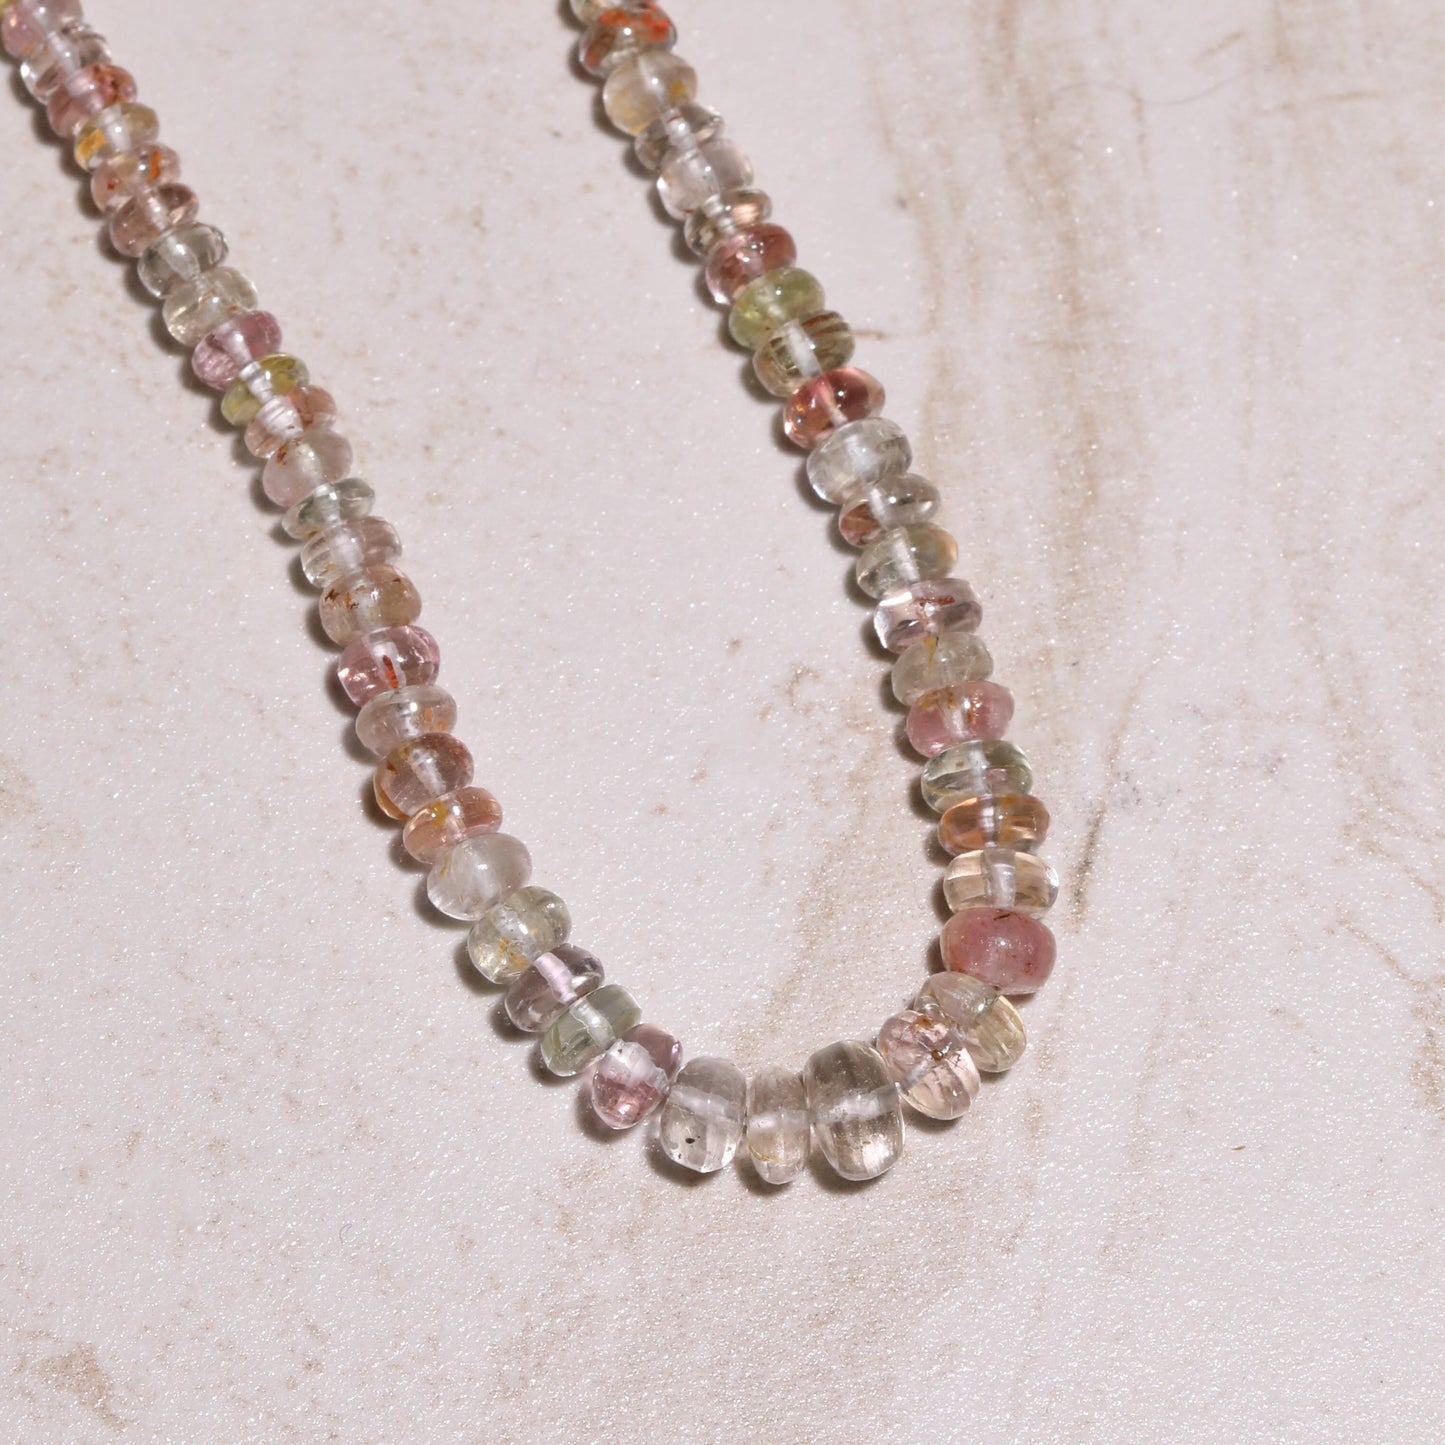 pink tourmaline bead necklace pastel pink and green beaded necklace tourmaline gemstone beads 14k